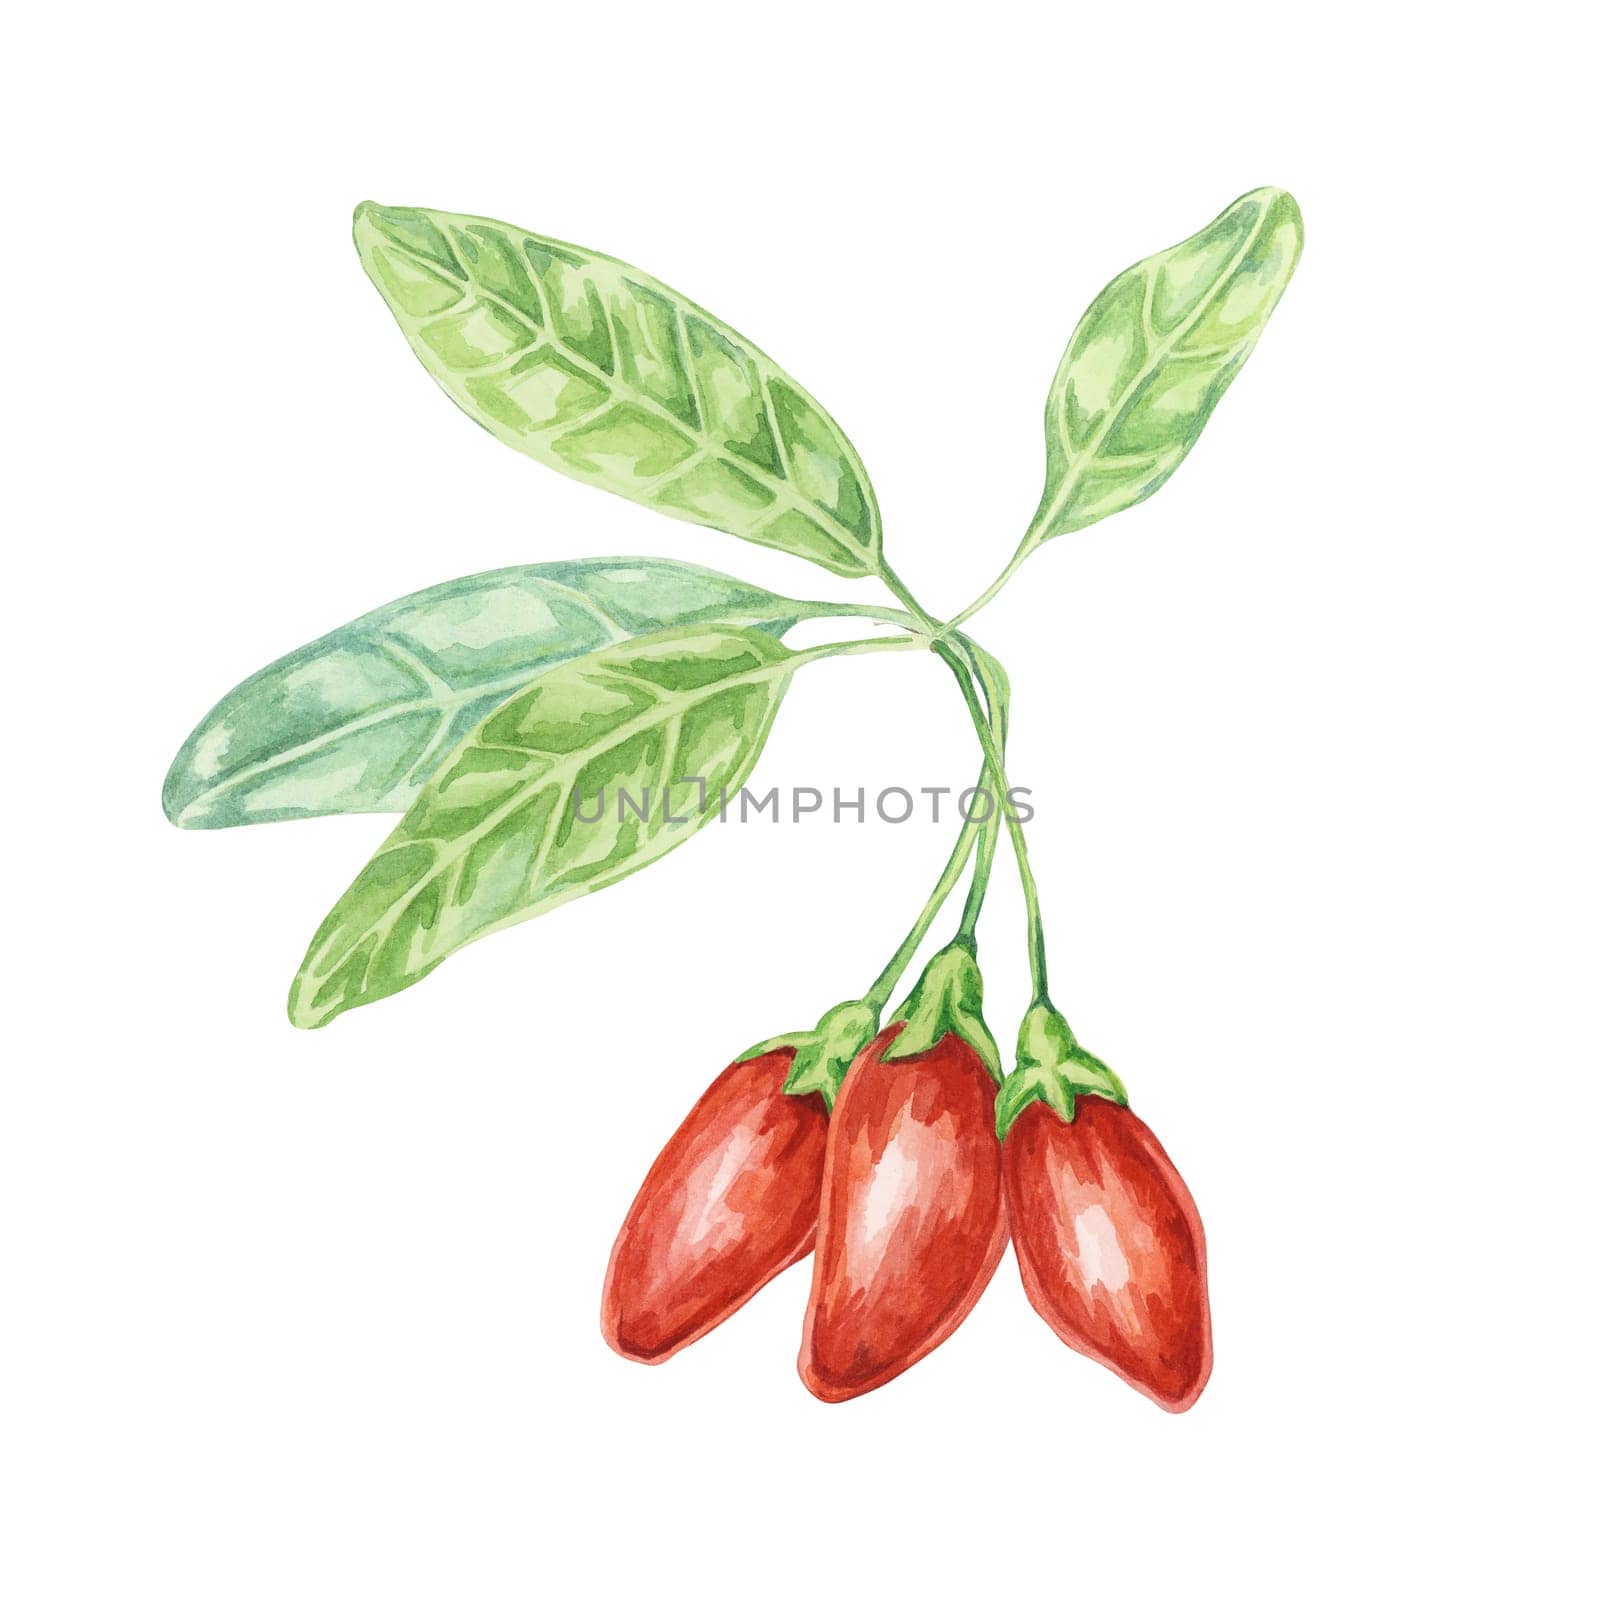 Goji berries with leaves in watercolor by Fofito